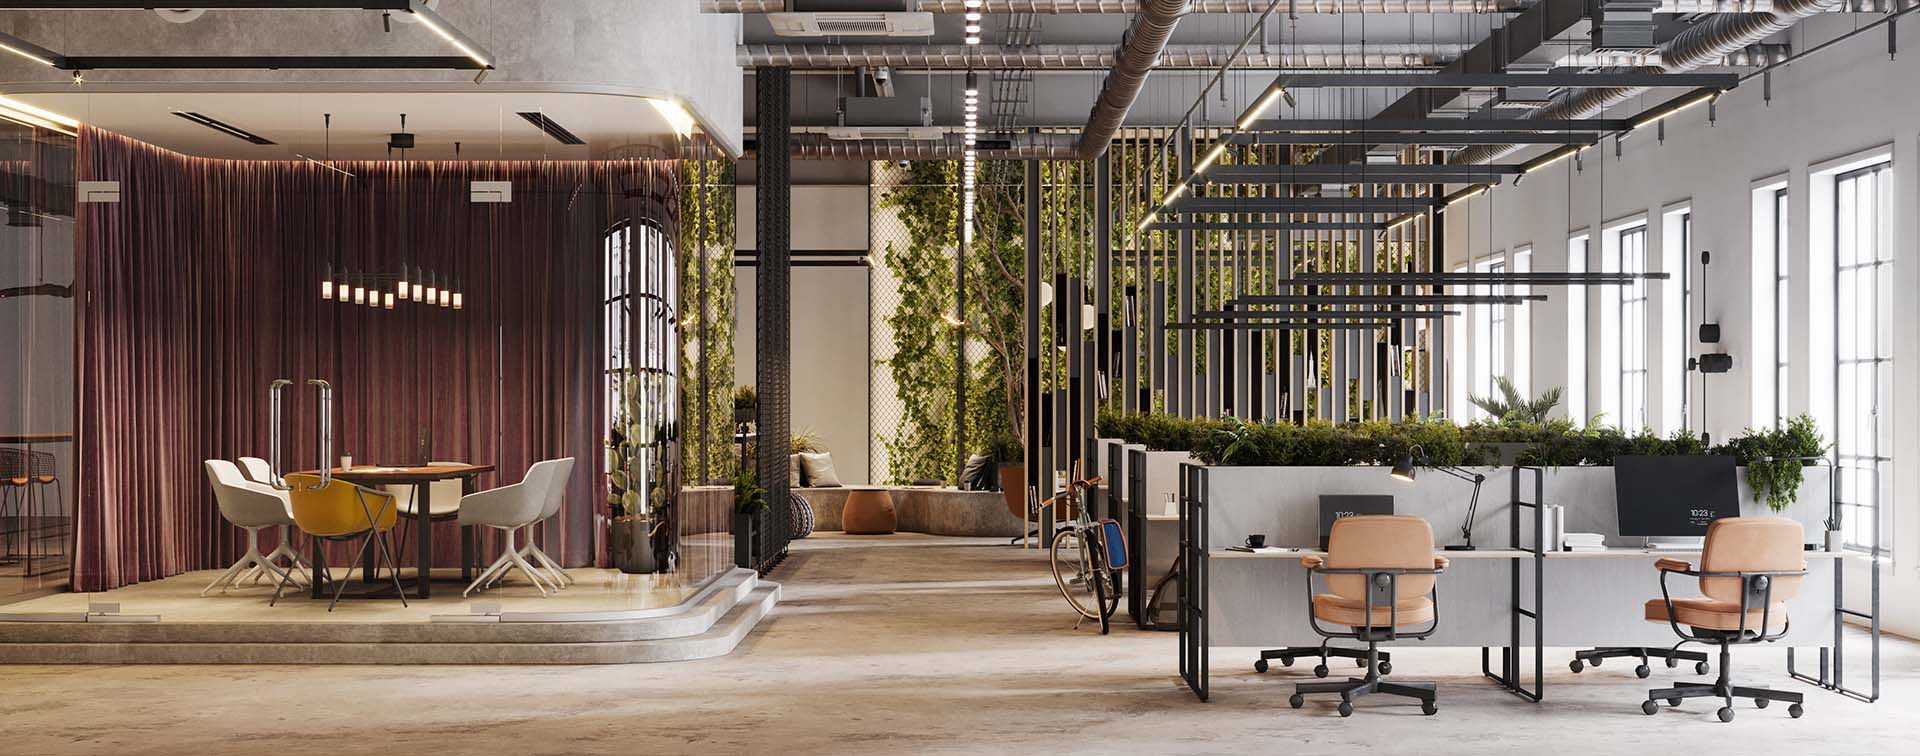 An empty modern office interior with exposed pipes in the ceiling, plants, and cubicle desks